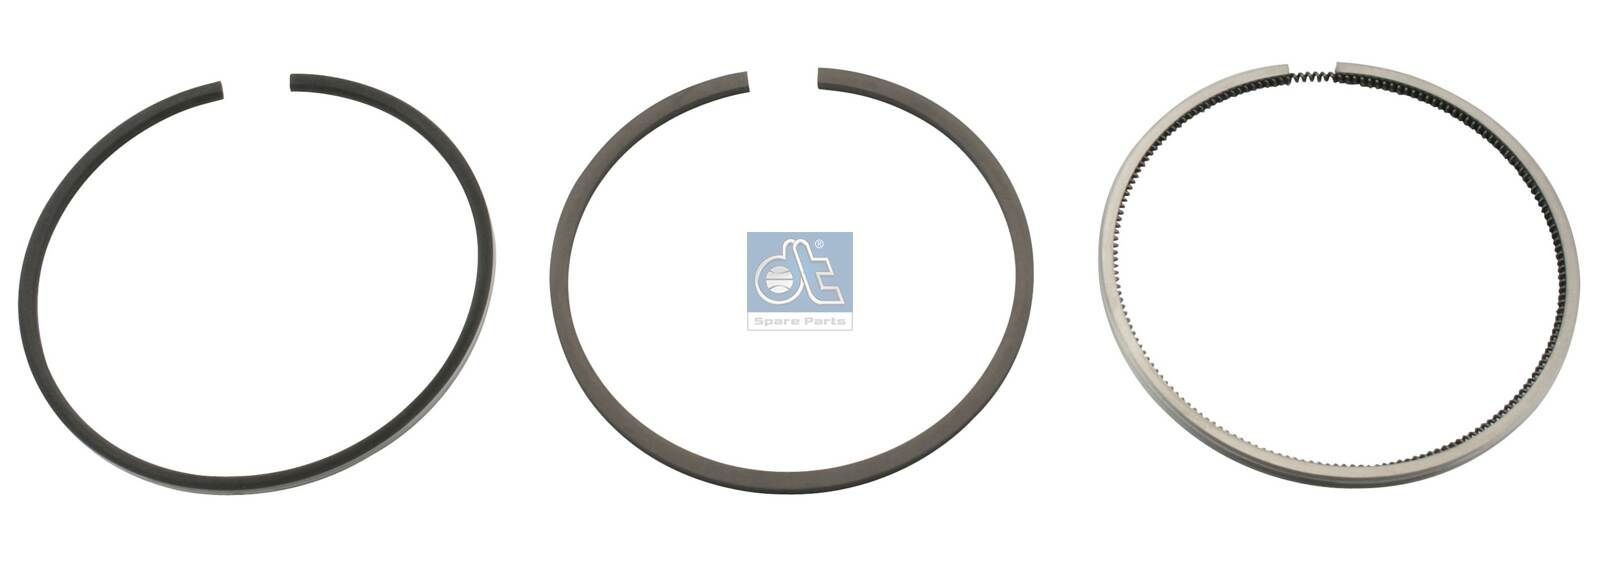 037 44 N0 DT Spare Parts 2.90082 Piston Ring Kit 275 713